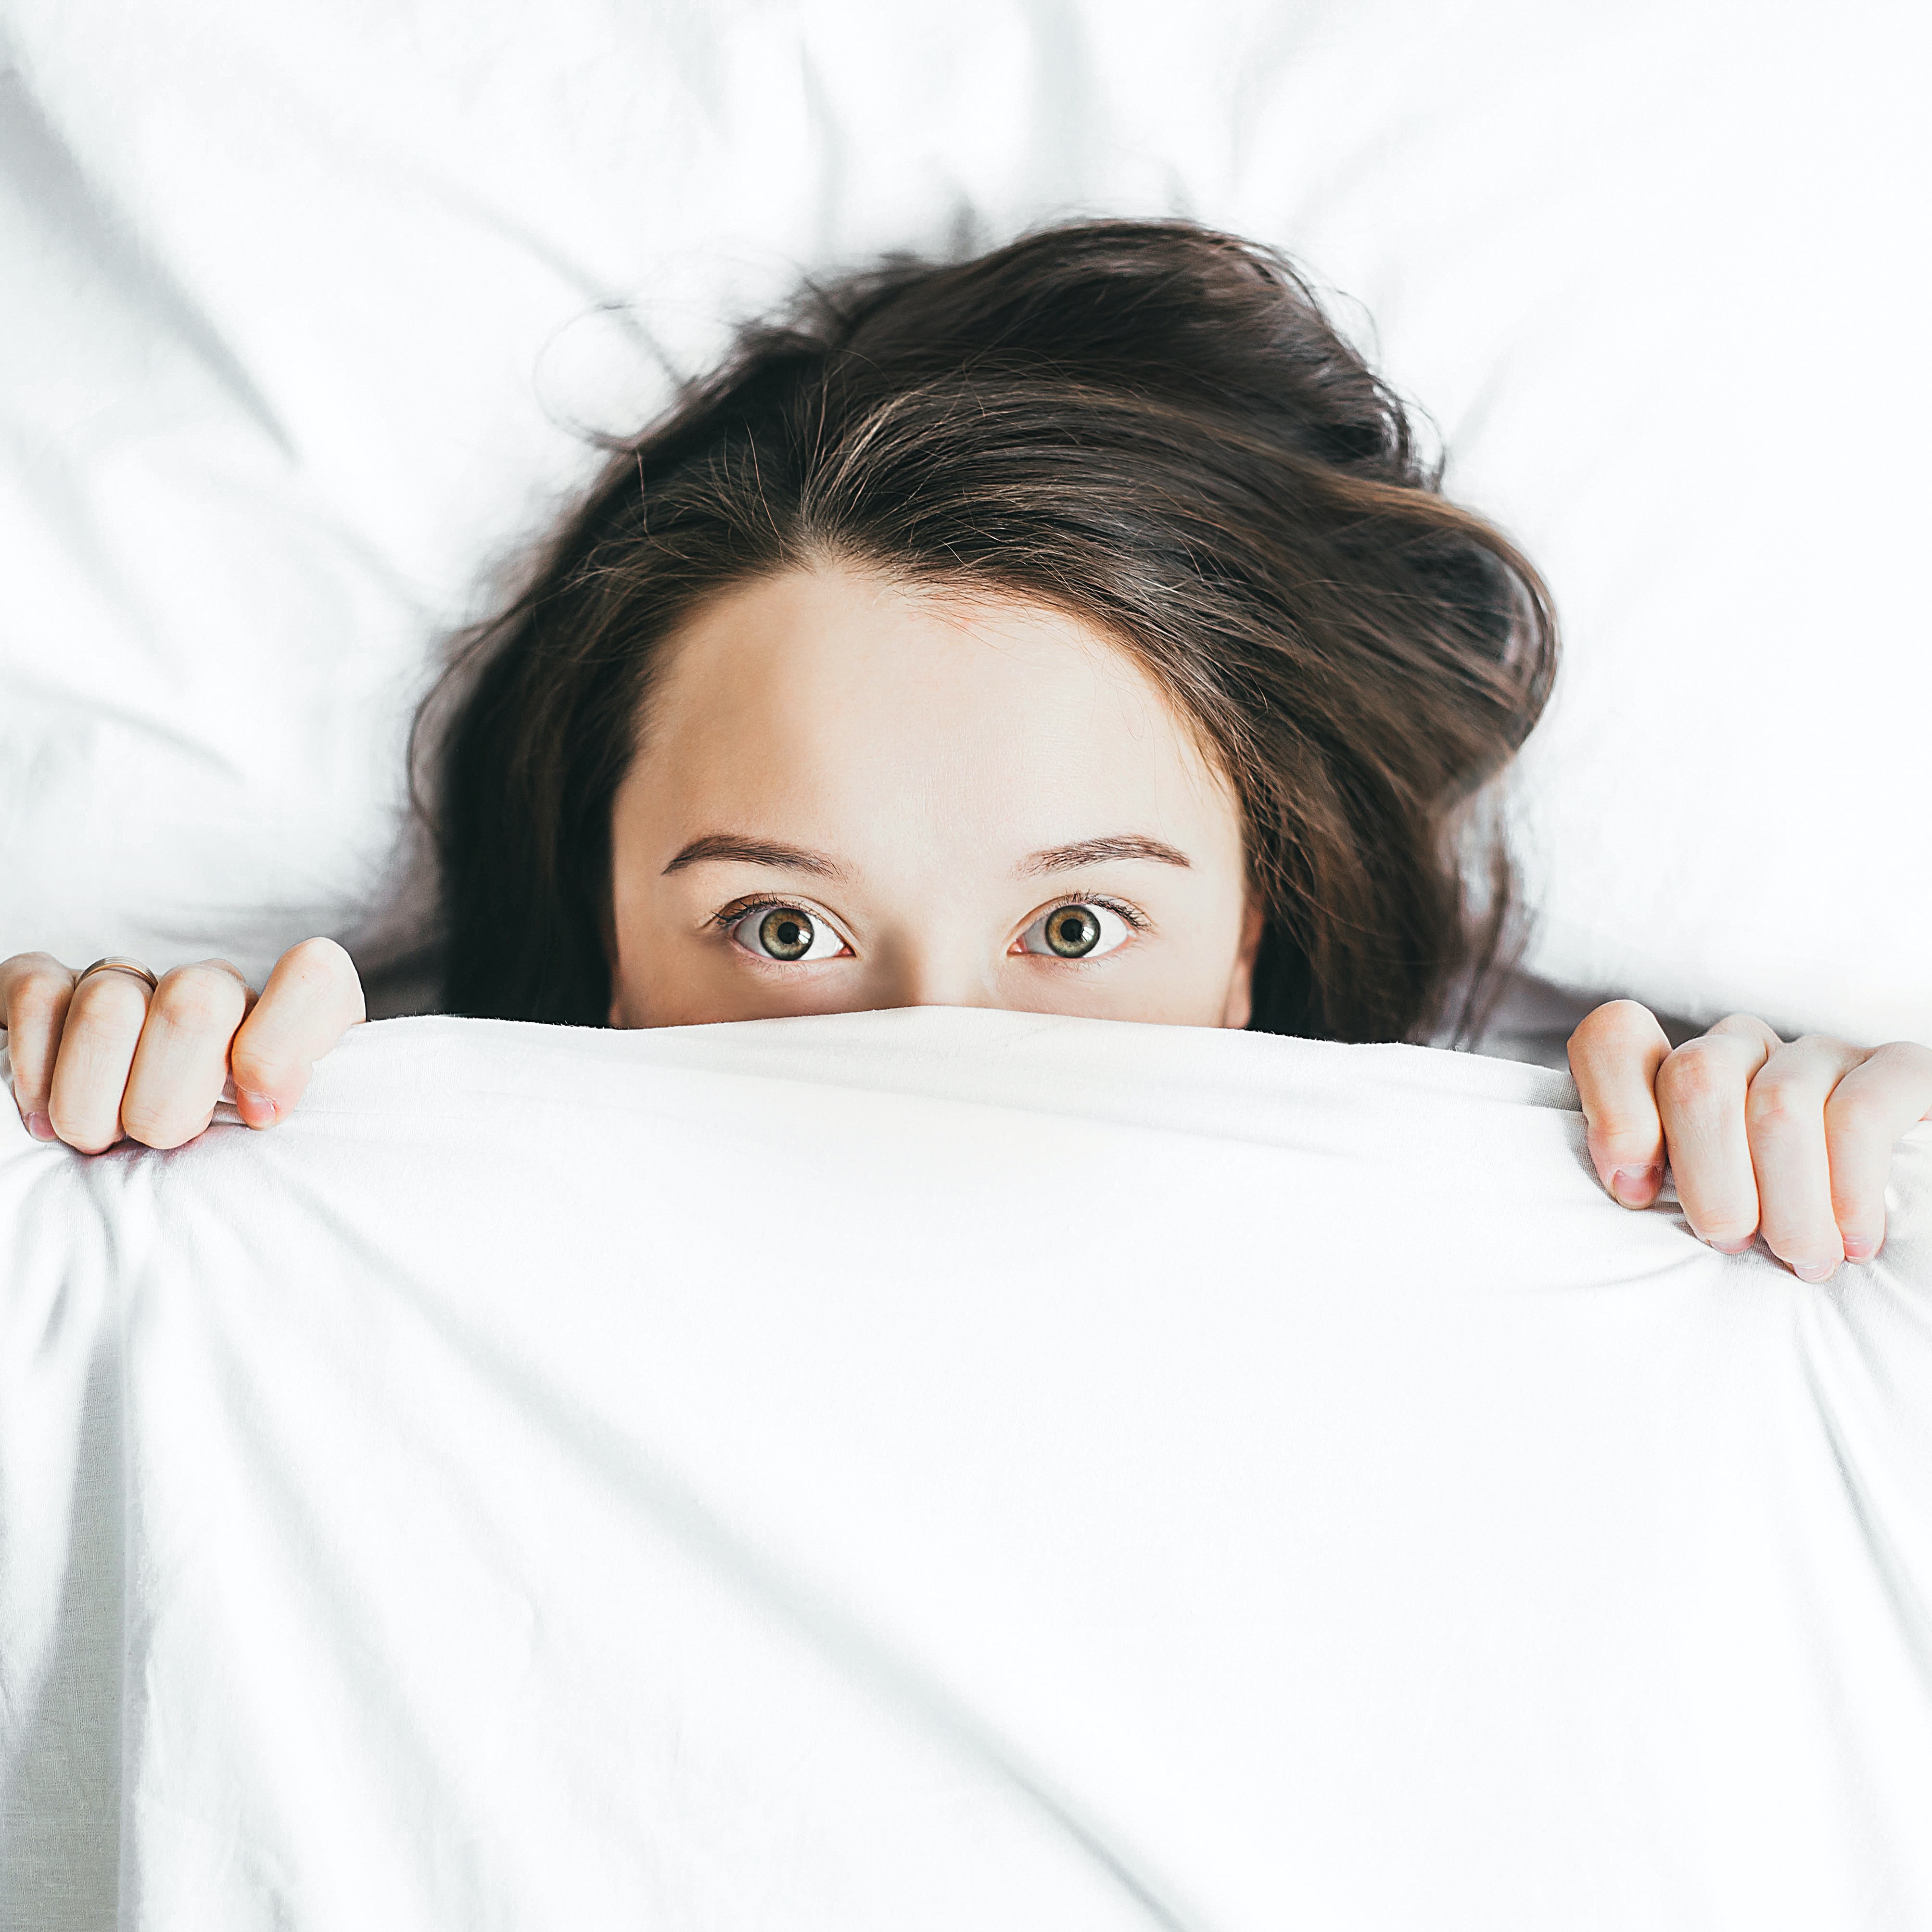 Woman peeking out from underneath sheets in bed